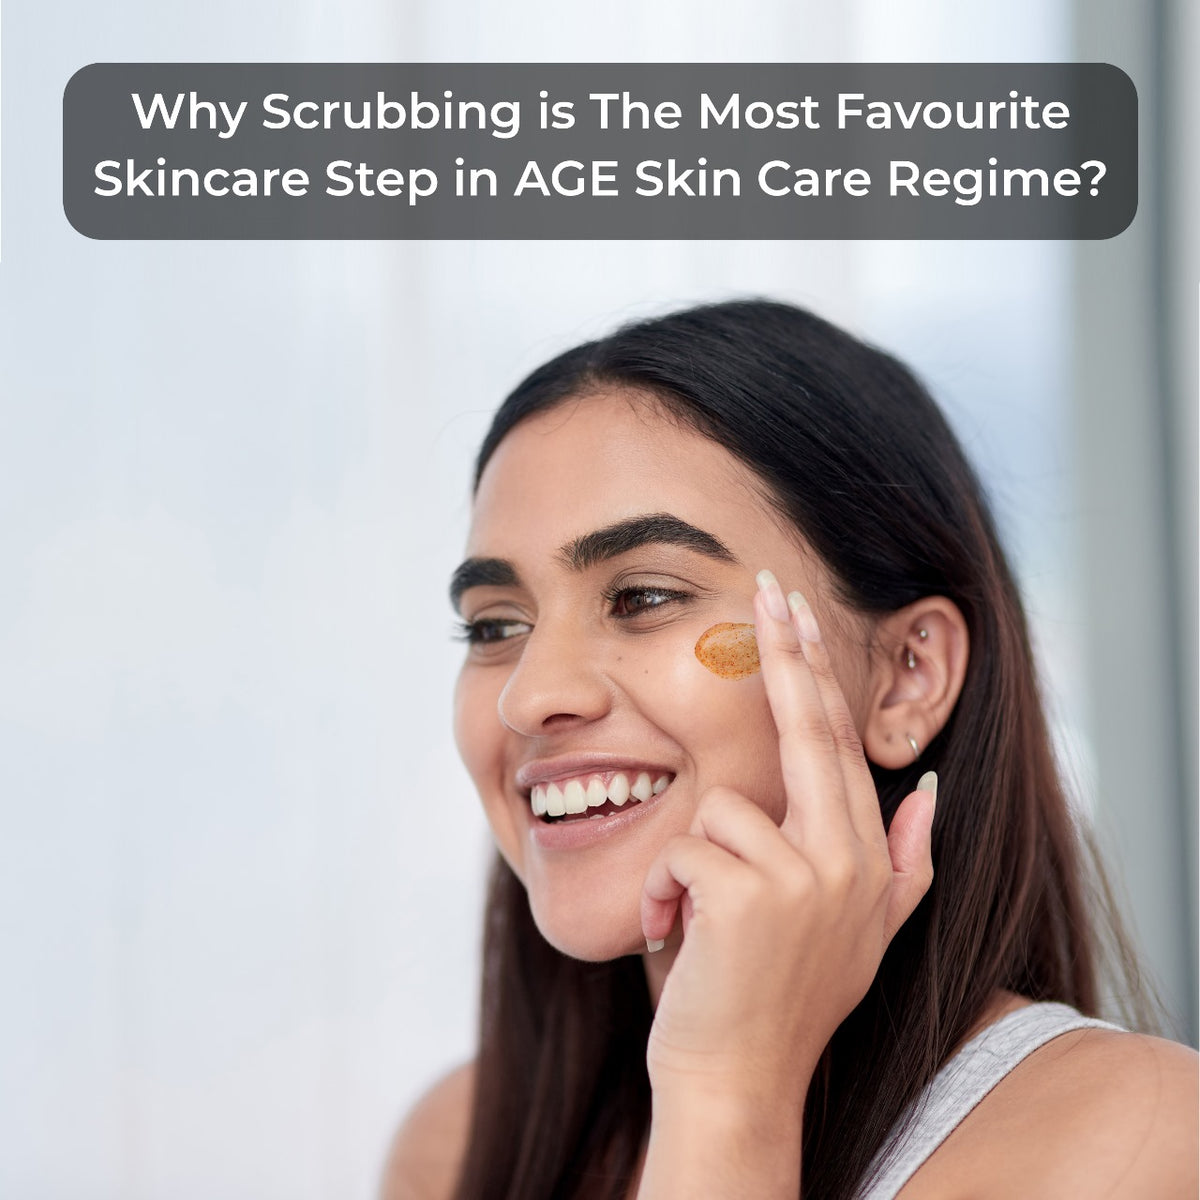 Why Scrubbing is The Most Favourite Skincare Step in AGE Skin Care Regime?